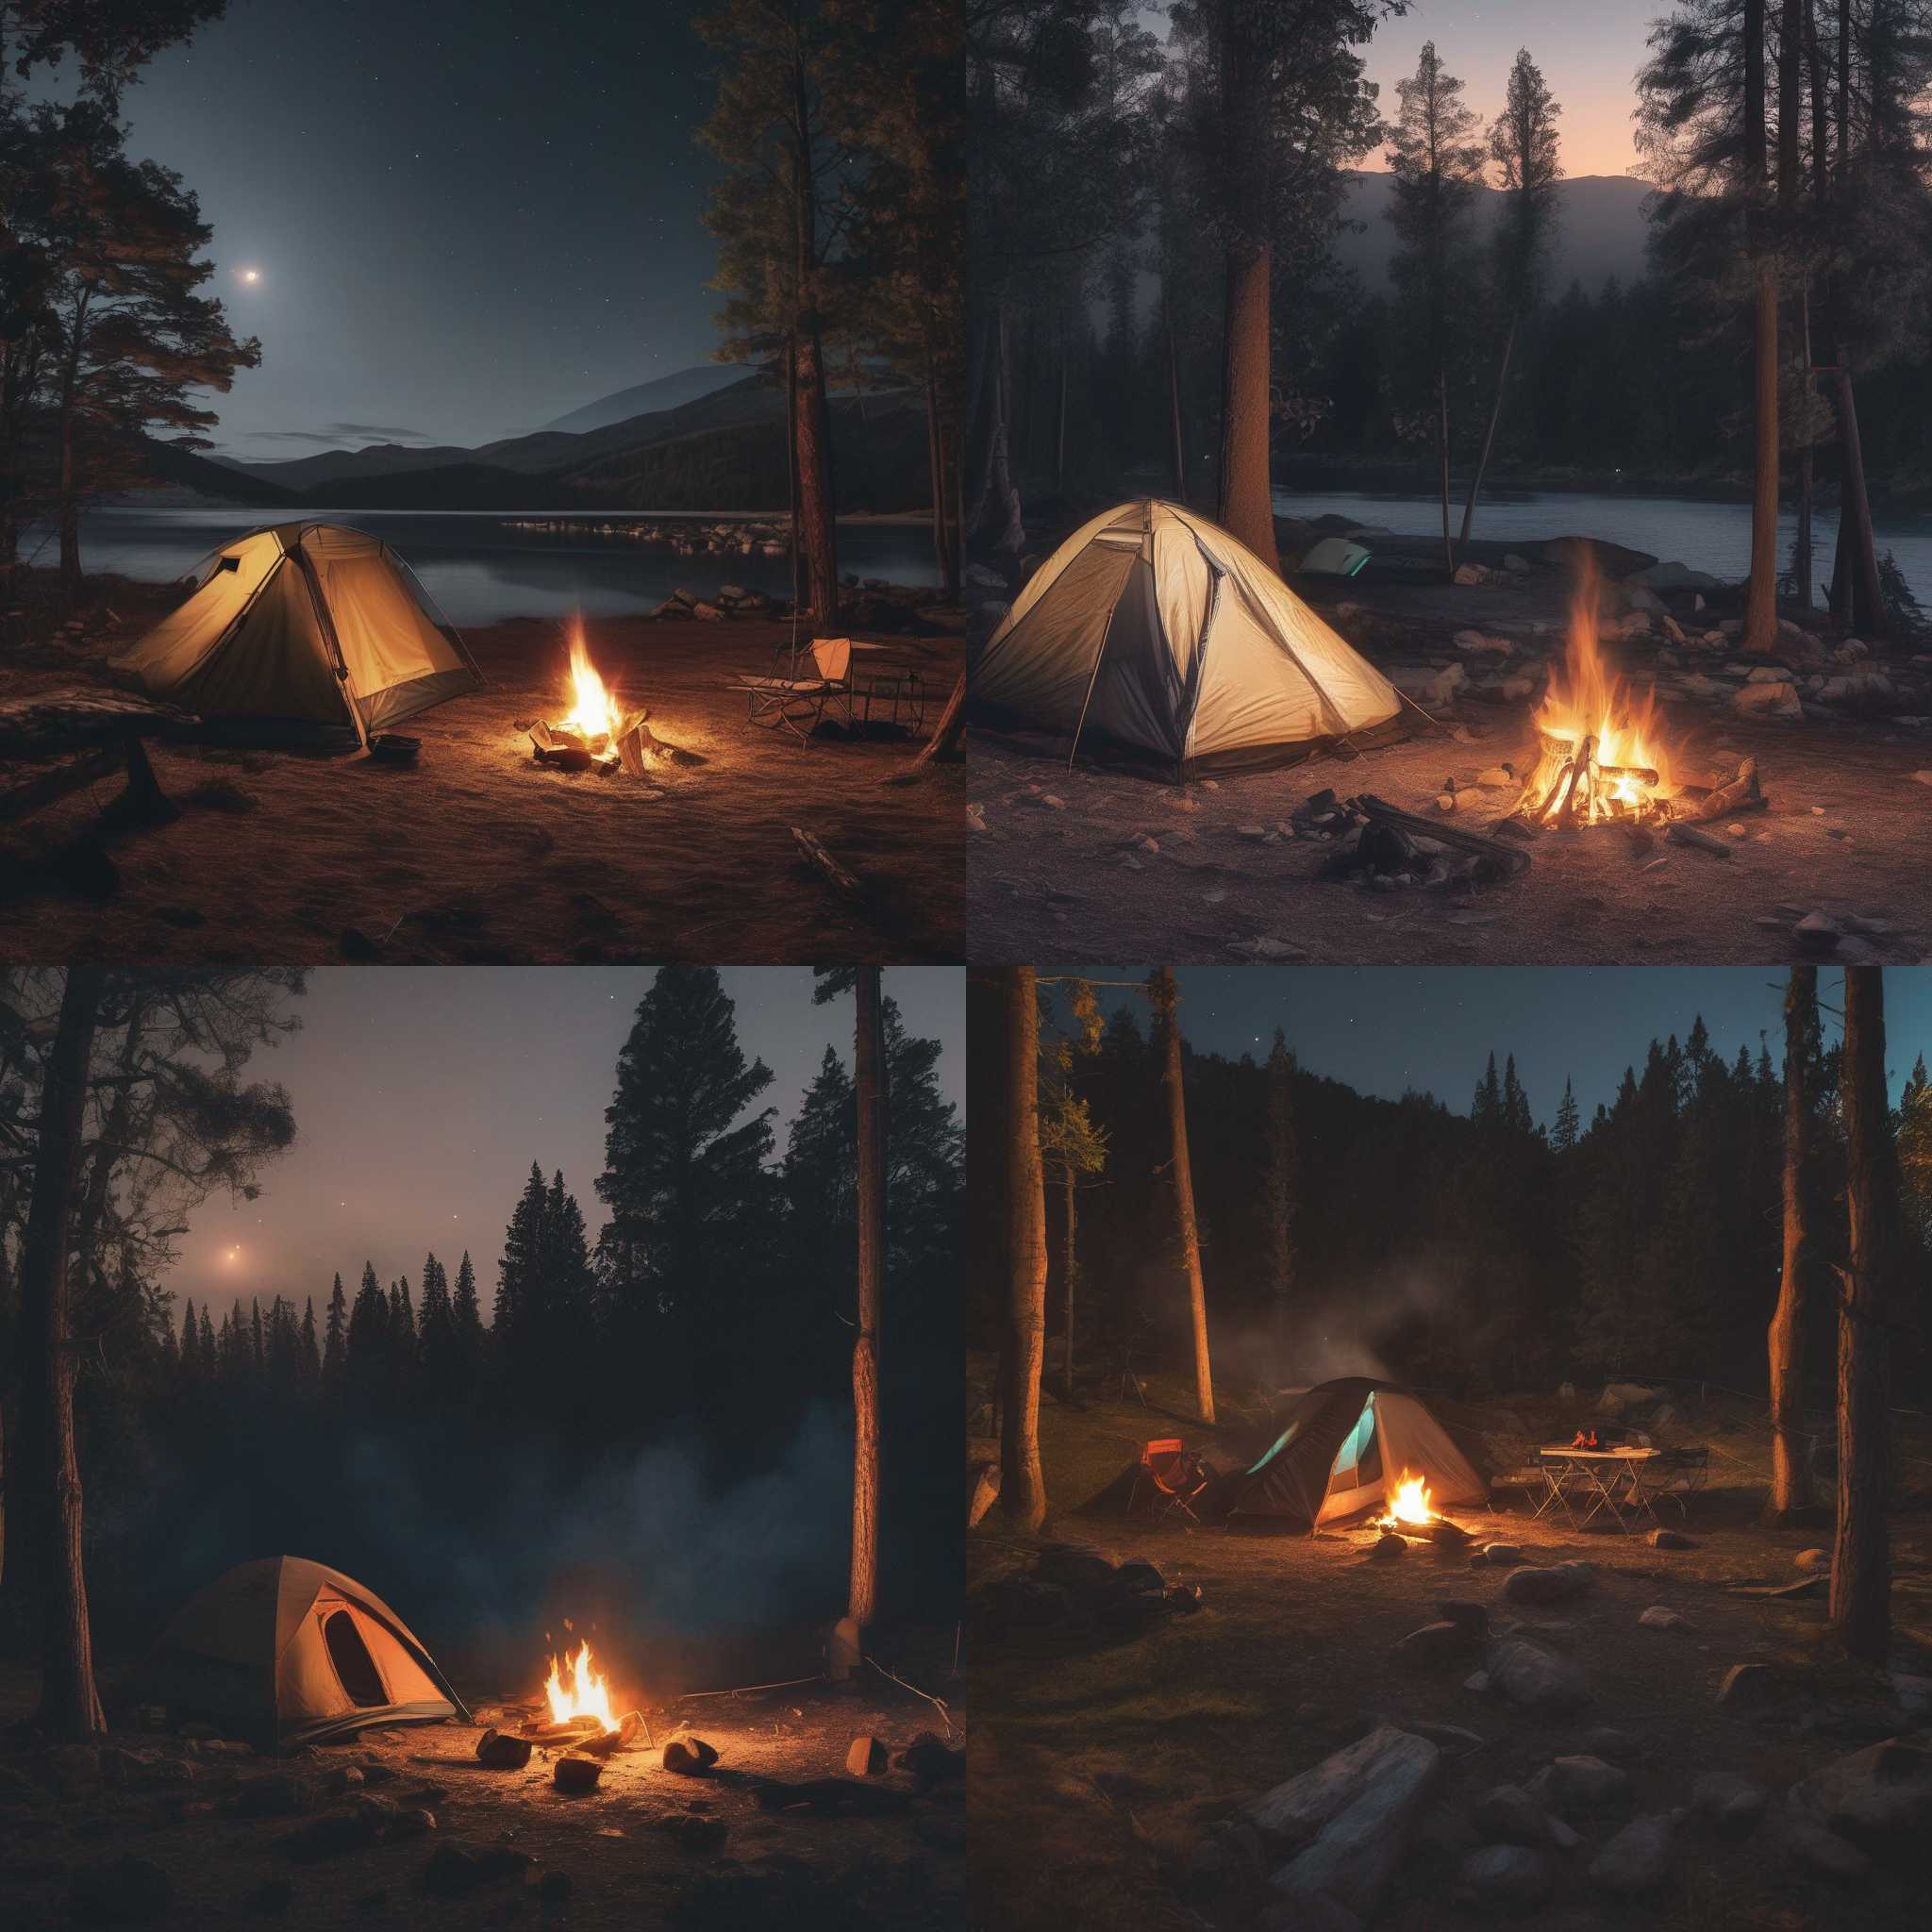 A campsite during a fire ban at night